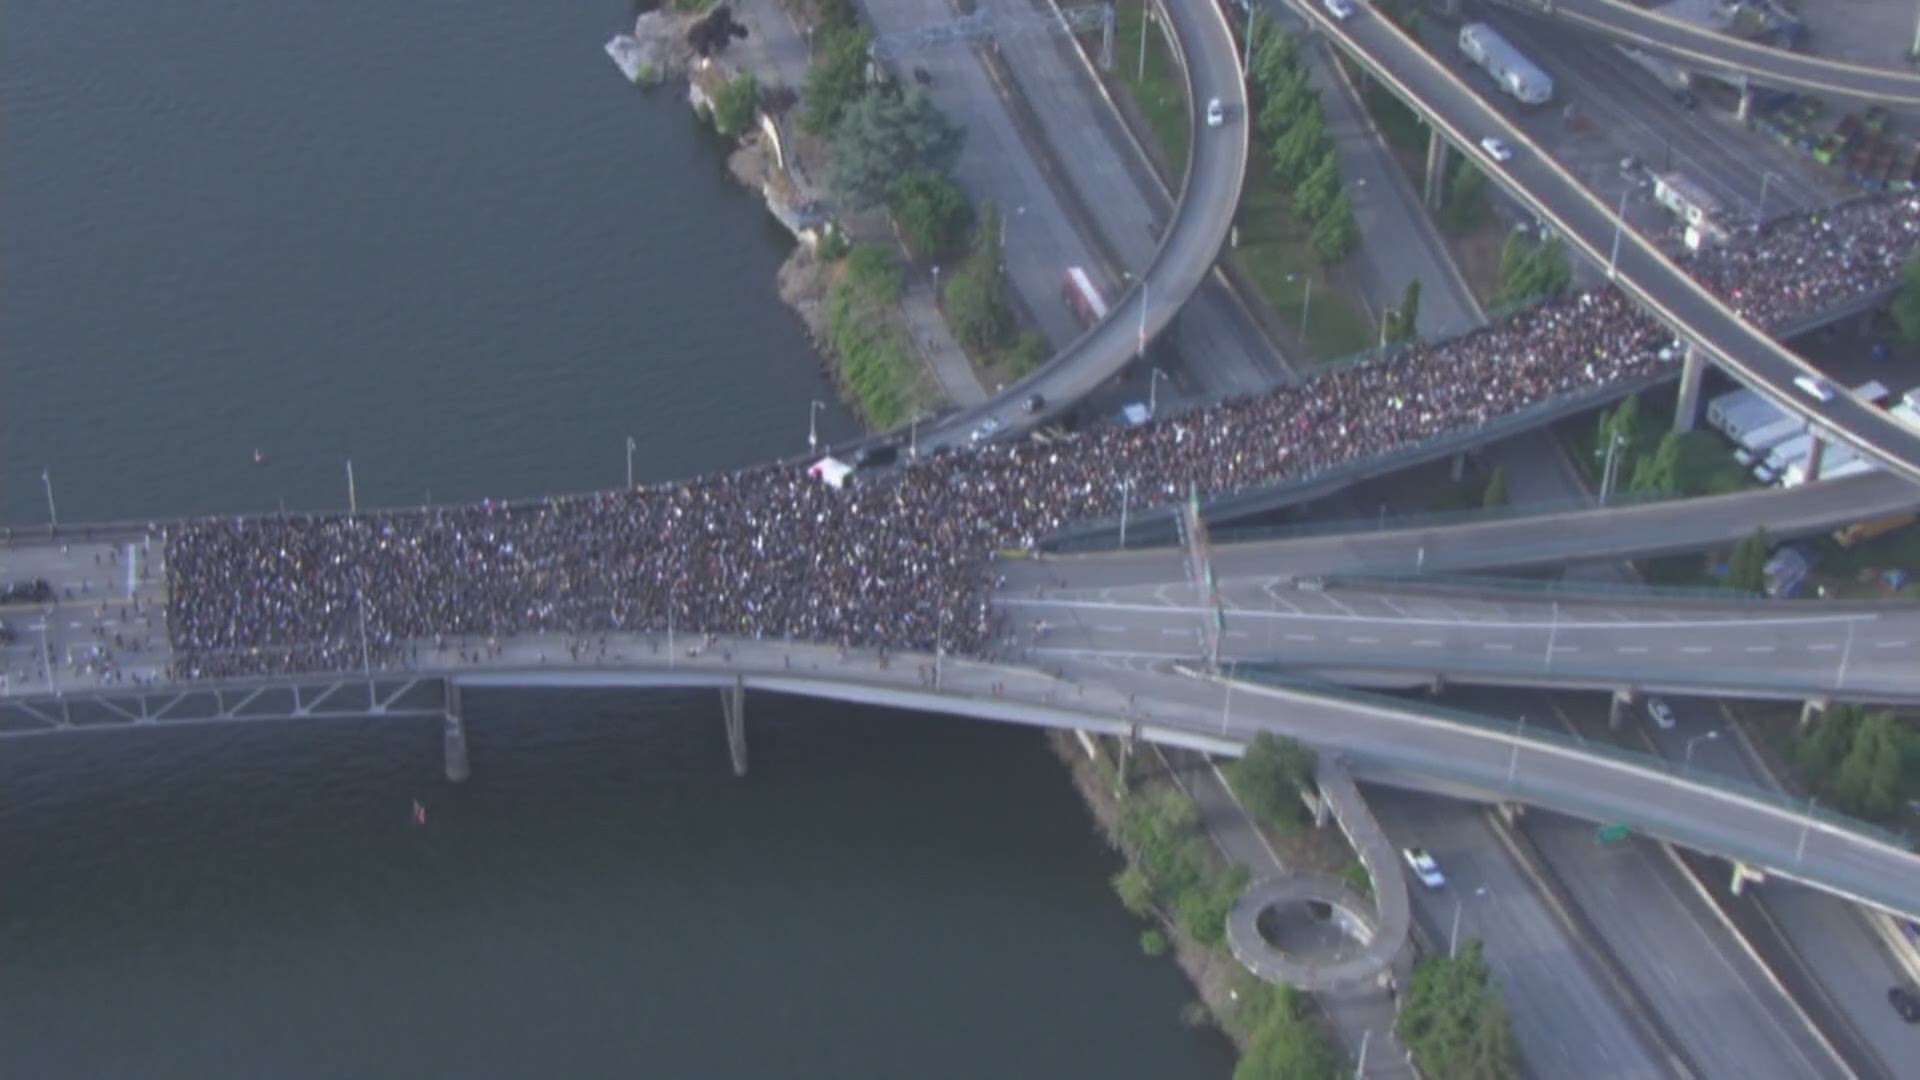 Portland Trail Blazer Damian Lillard marched at the front of a group of thousands of protesters crossing the Morrison Bridge into downtown Portland.